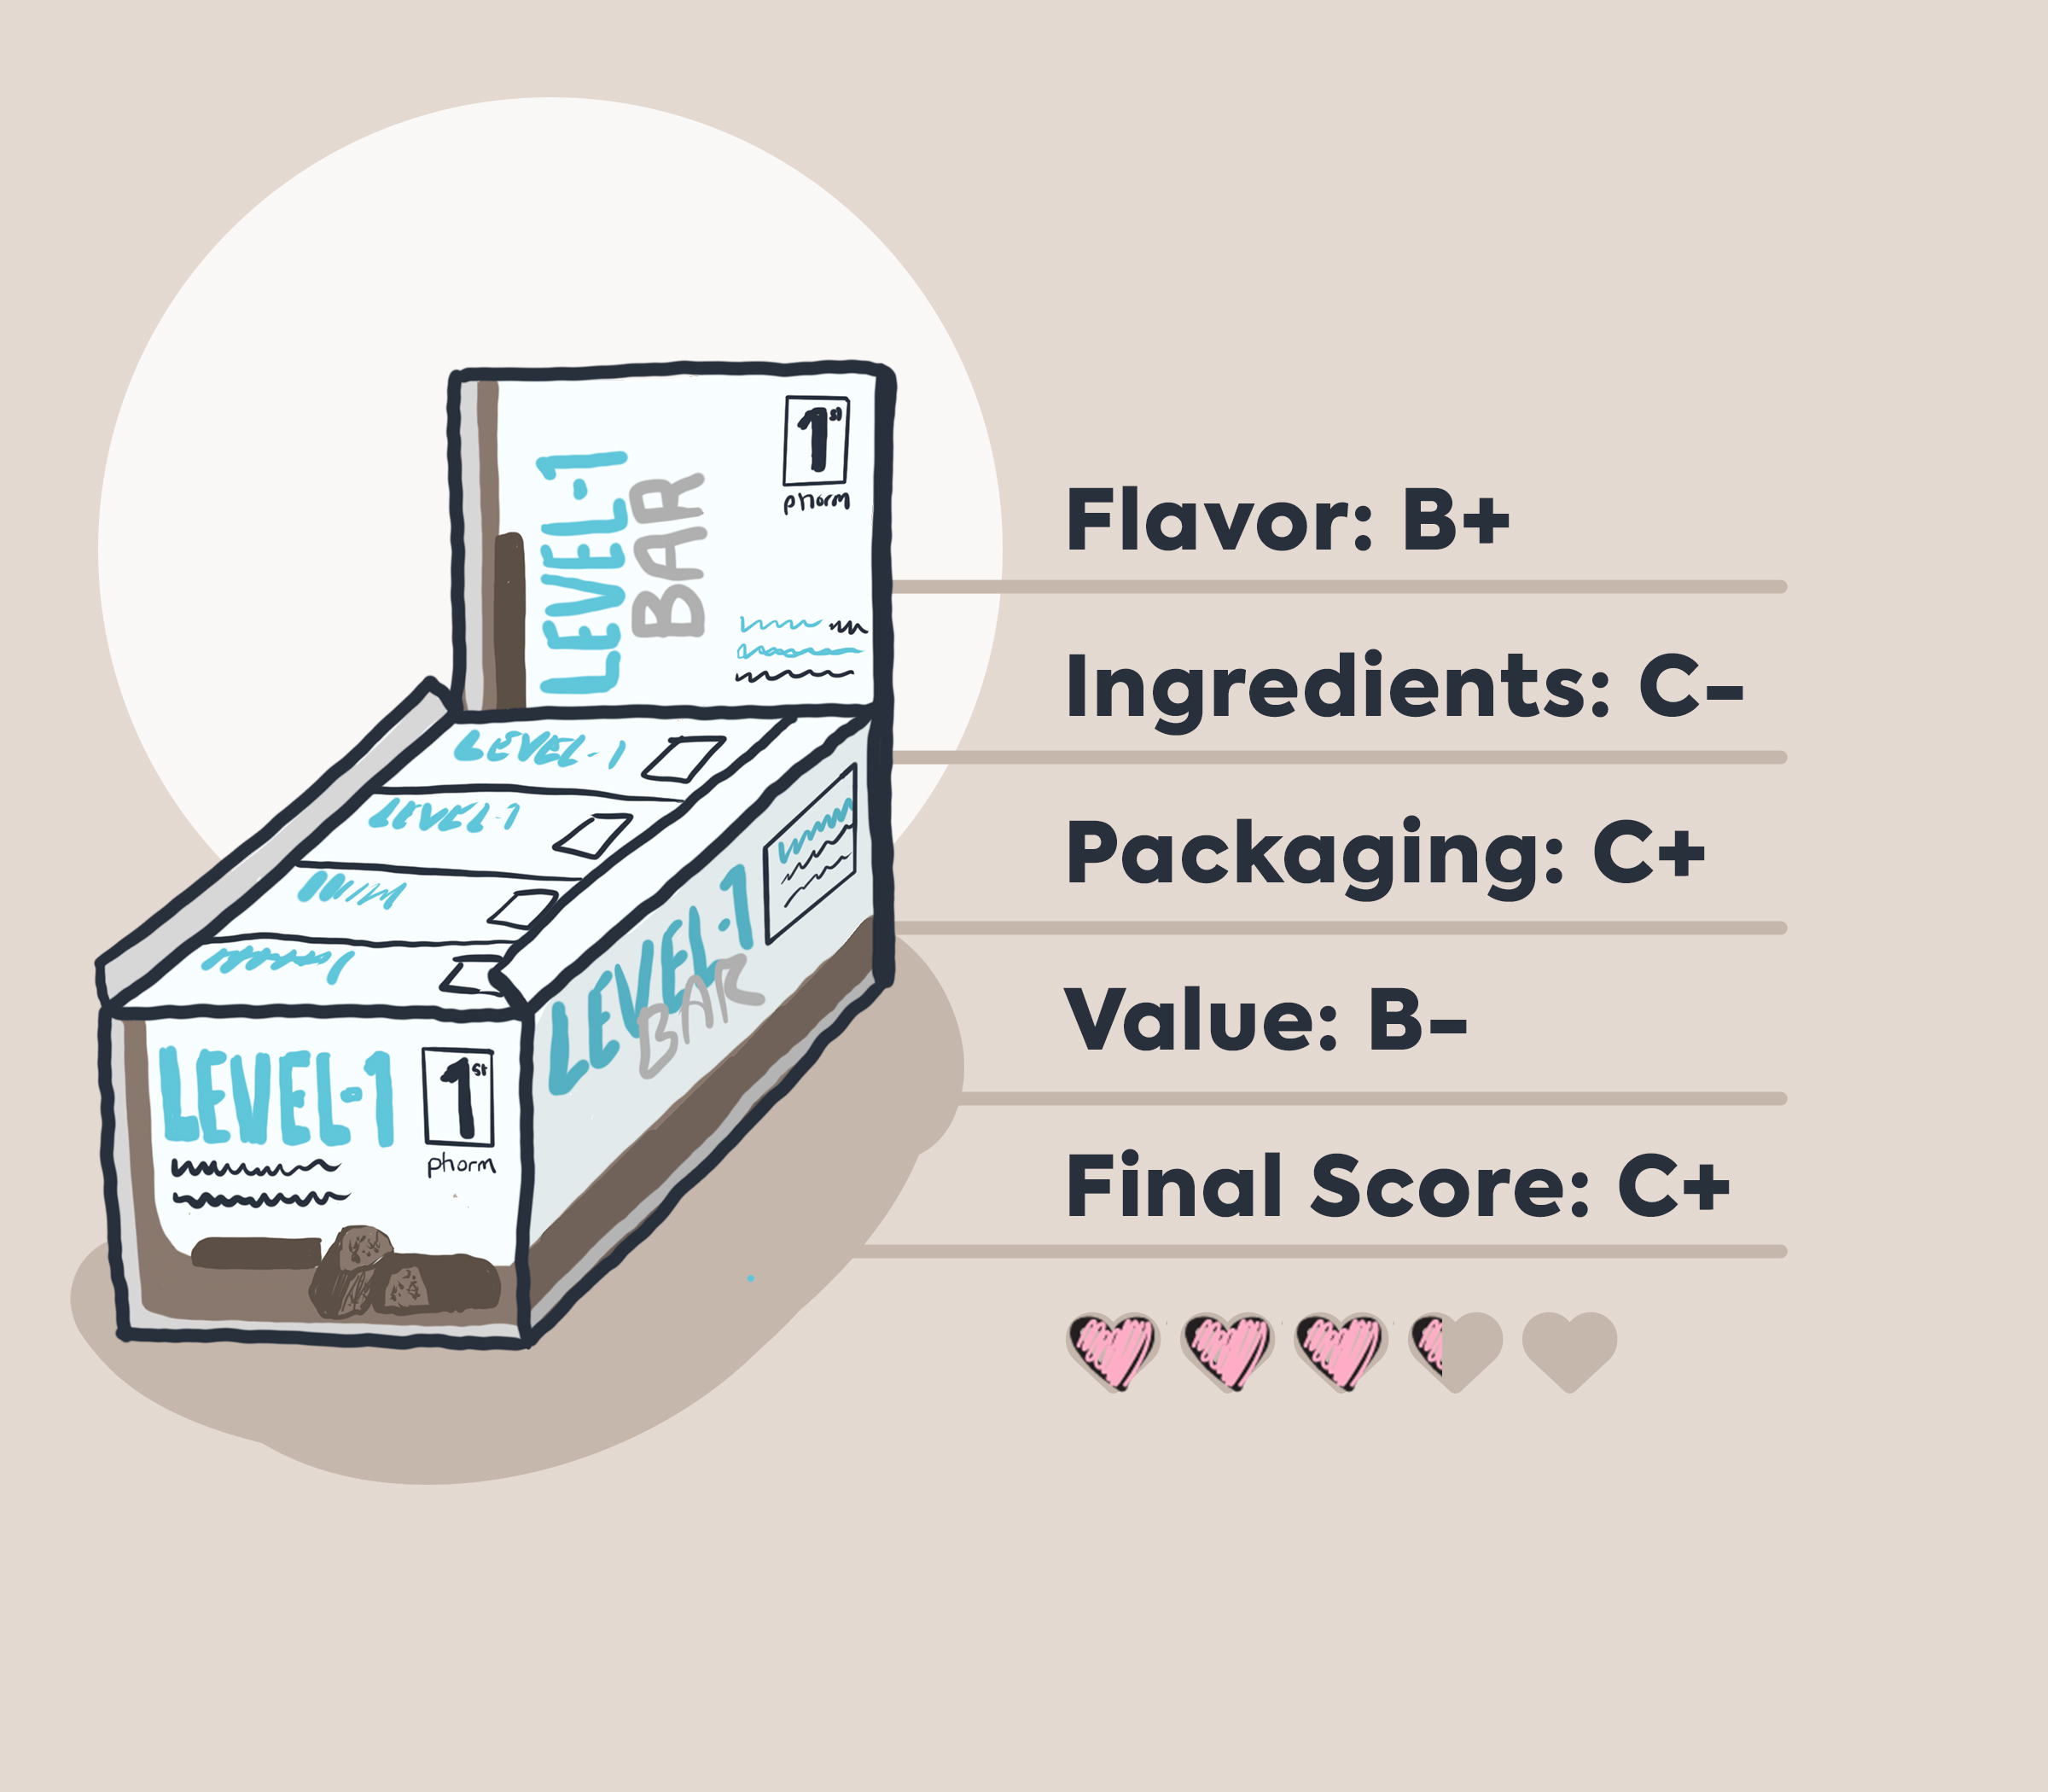 1st phorm level 1 protein bar cartoon illustration with review infographic